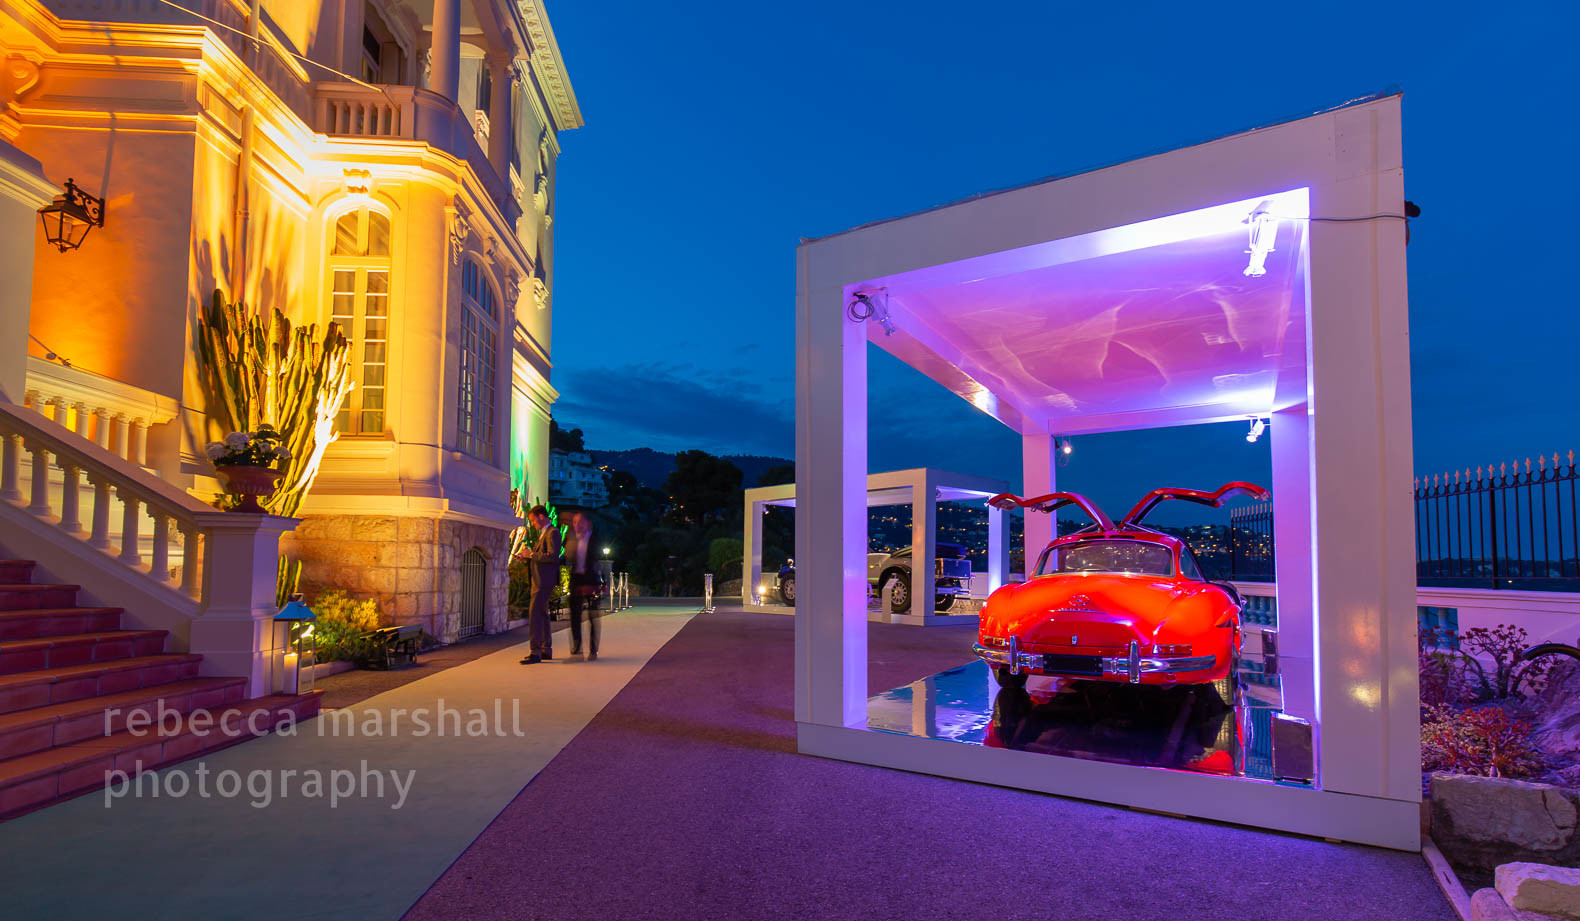 Dusk photograph showing red vintage Mercedes sports car on display in front of a villa